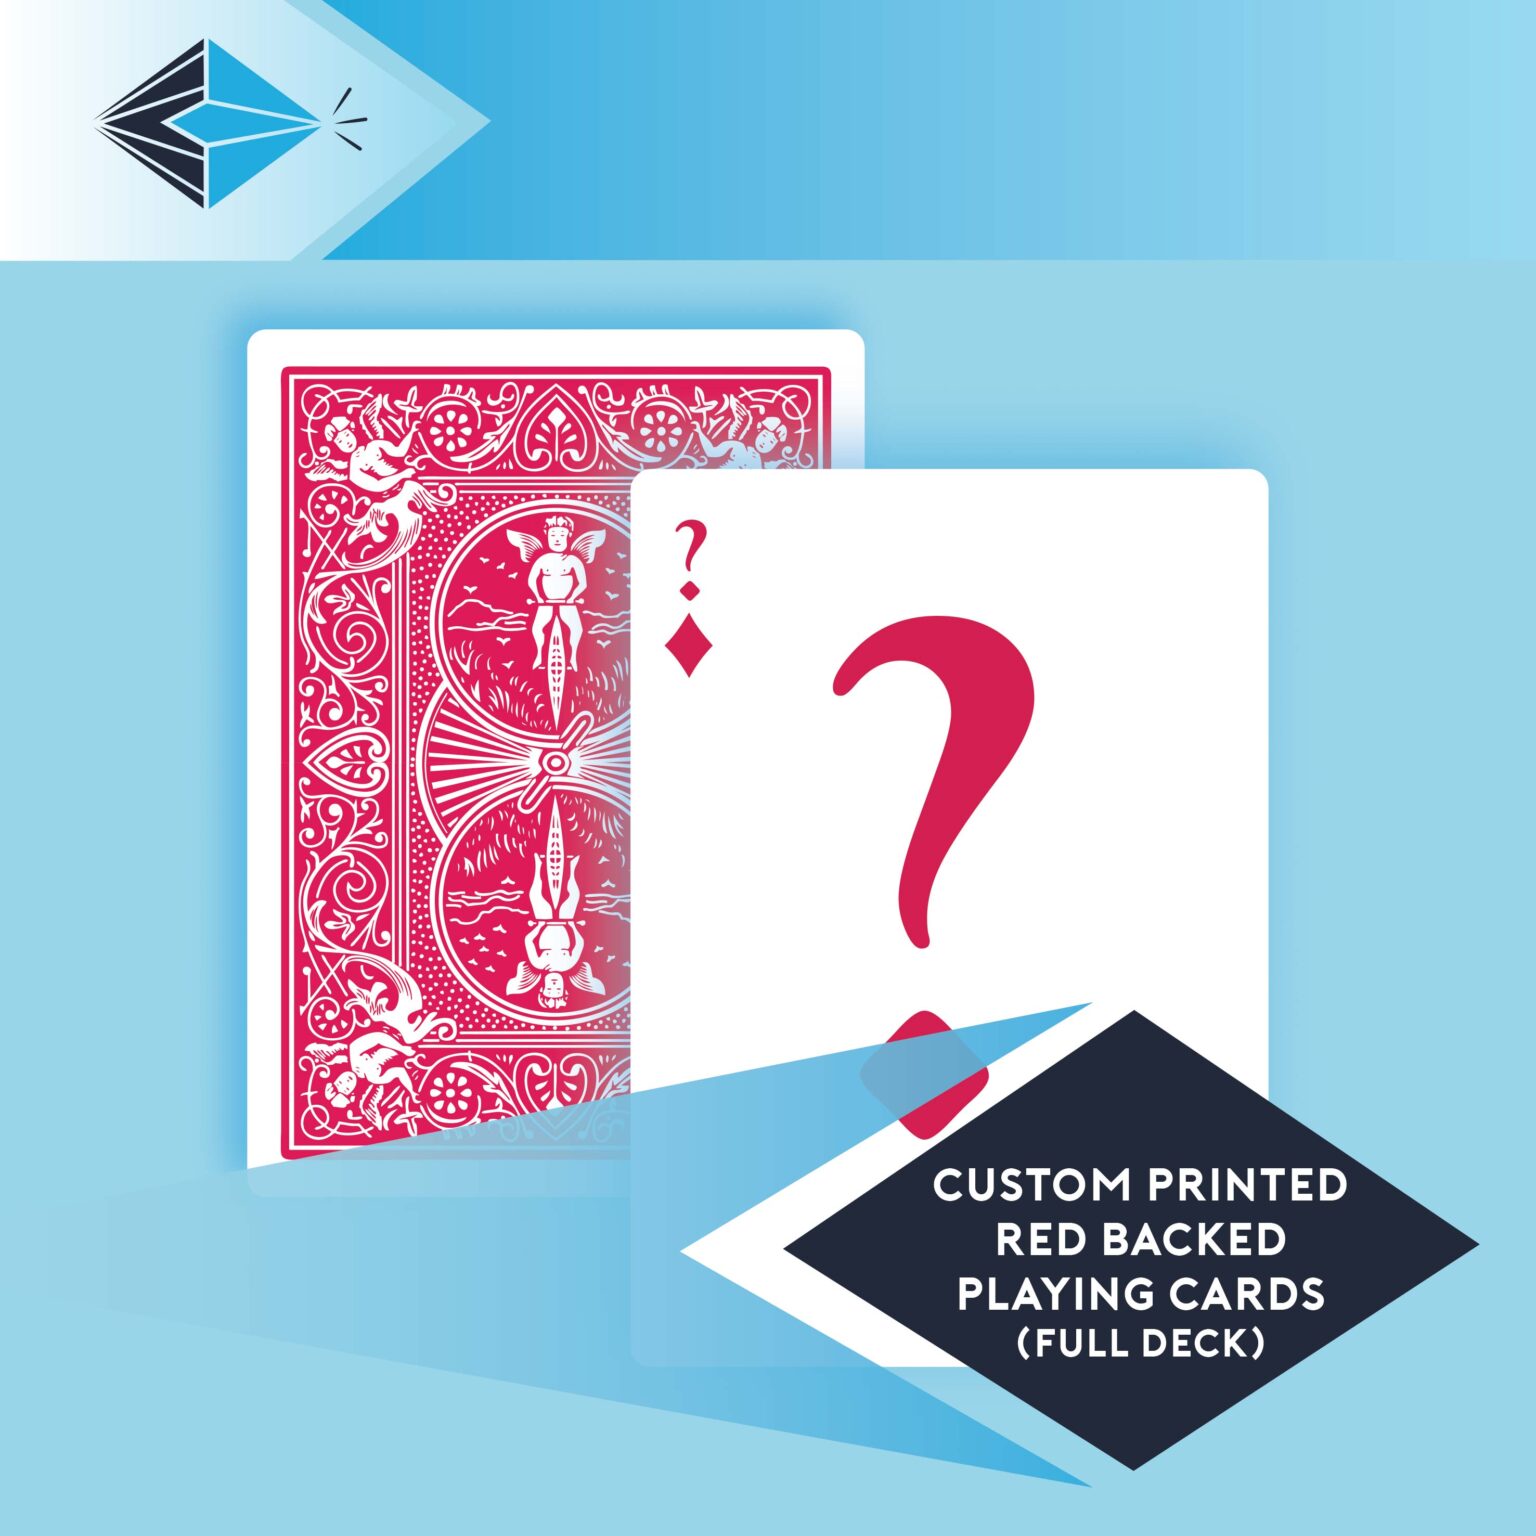 Custom Red backed playing cards printing for magicians full deck image for showcase on our magicians section of PrintbyMagic.com